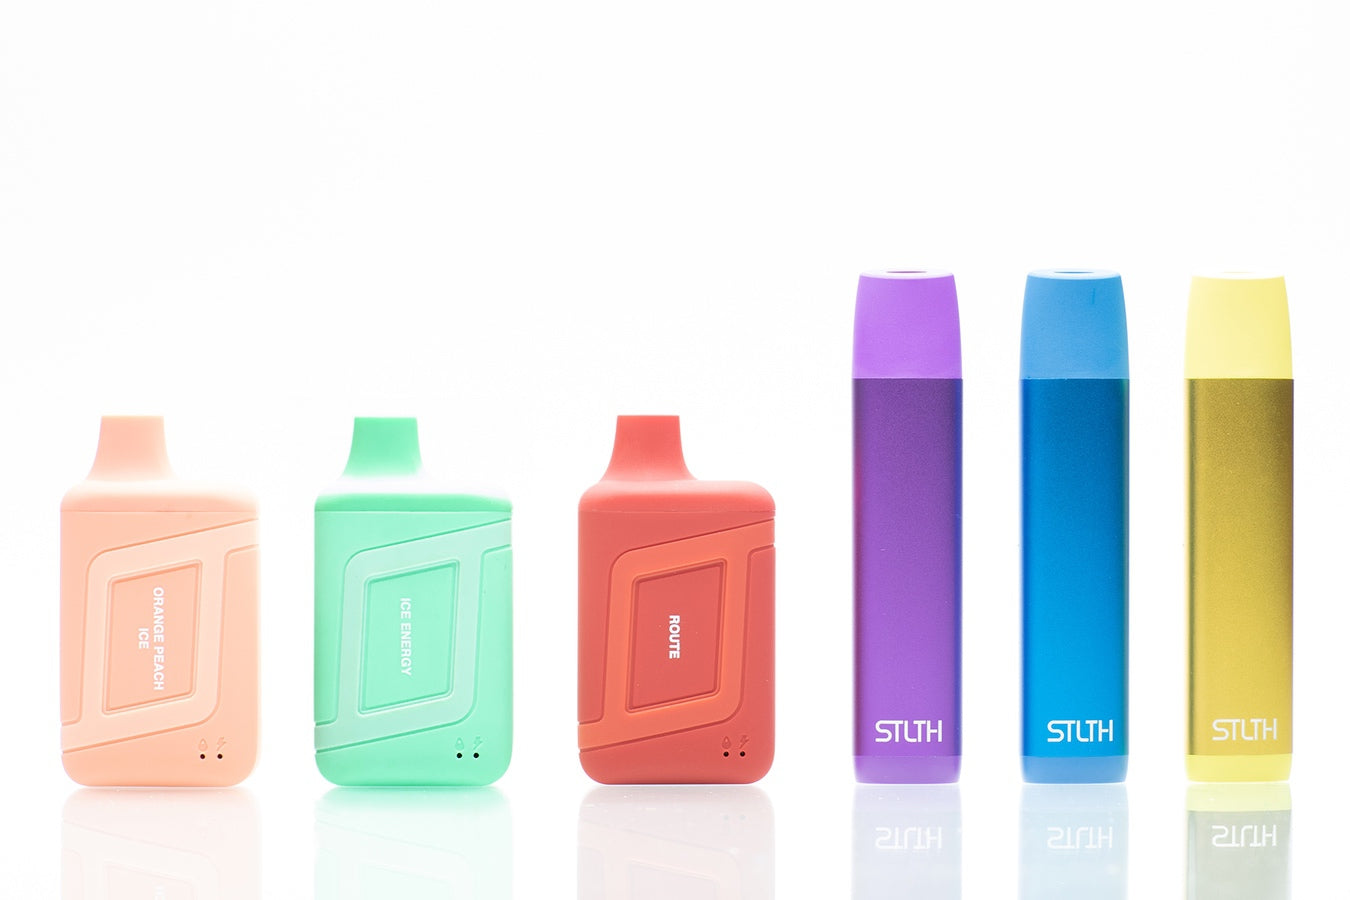 STLTH 3K disposable vape devices next to 5K devices